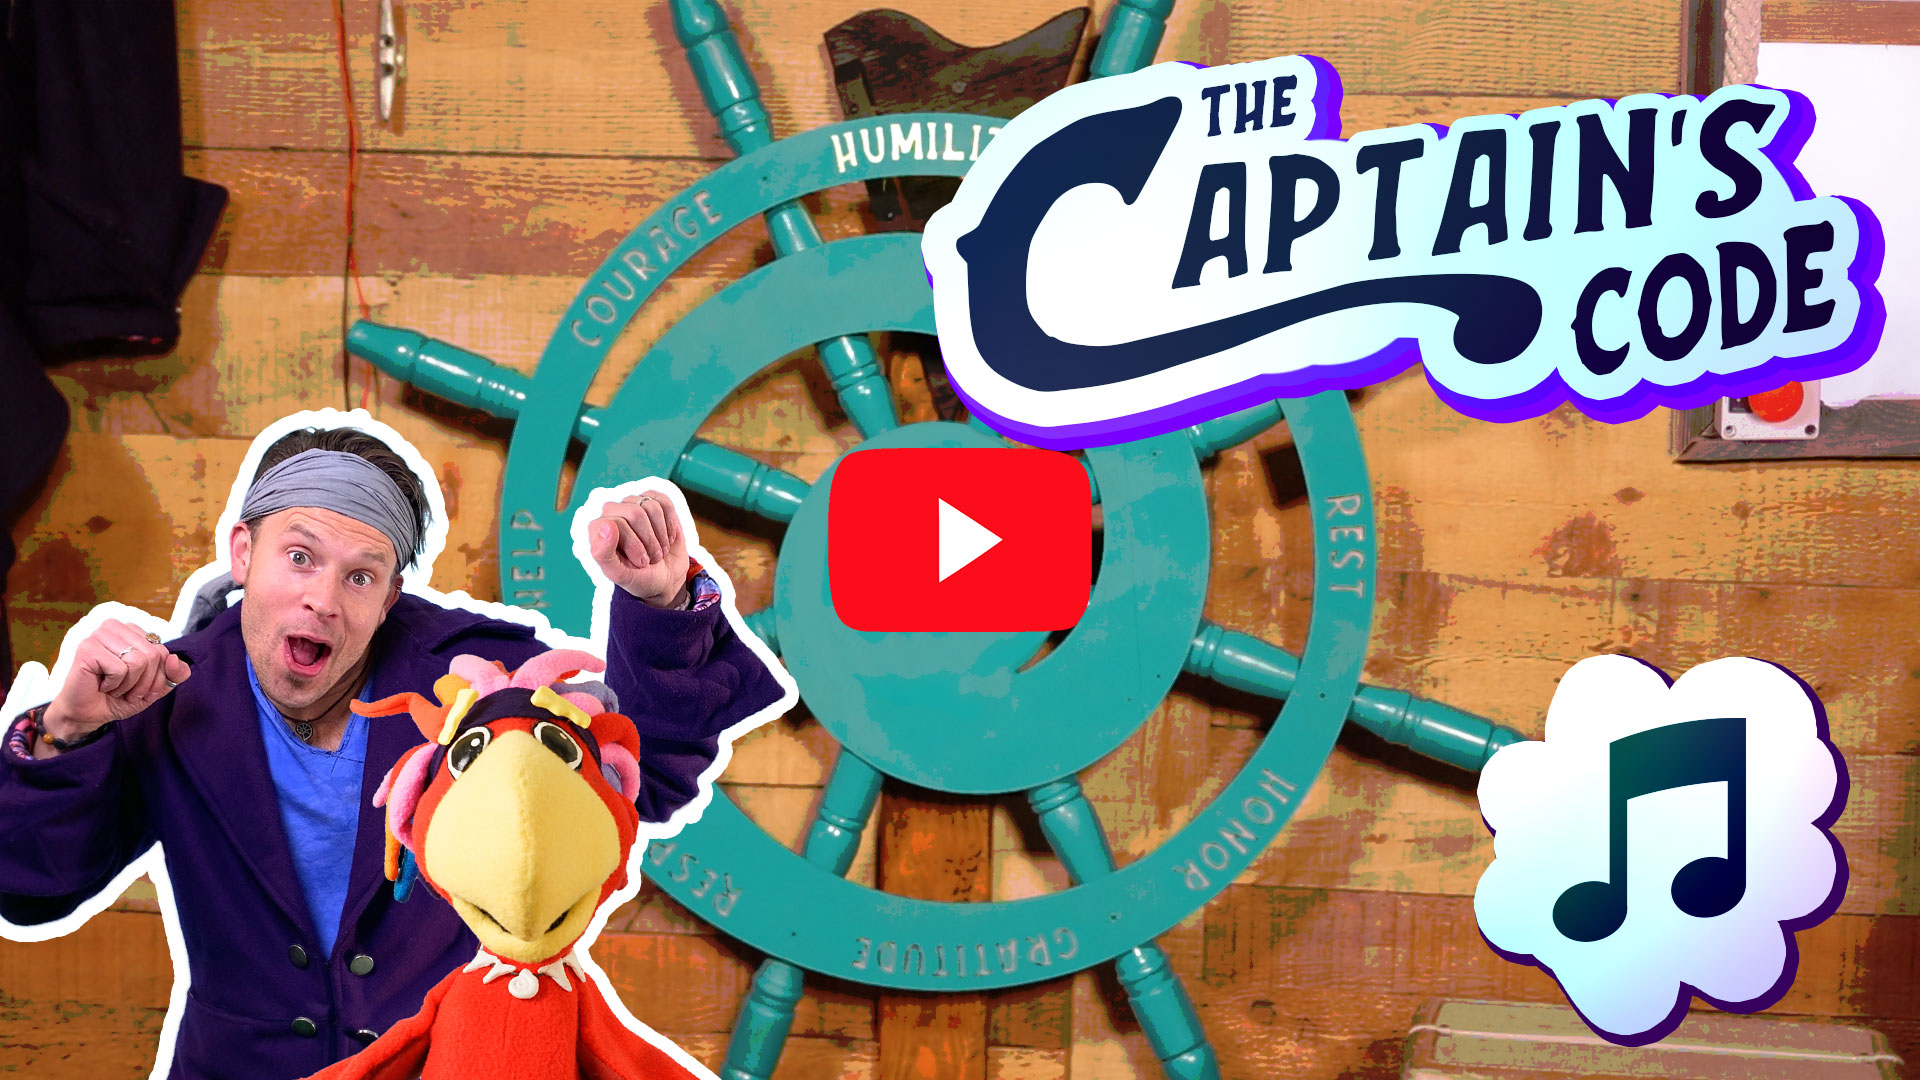 The Captain's Code Song Music Video Thumbnail with the Teal Wheel